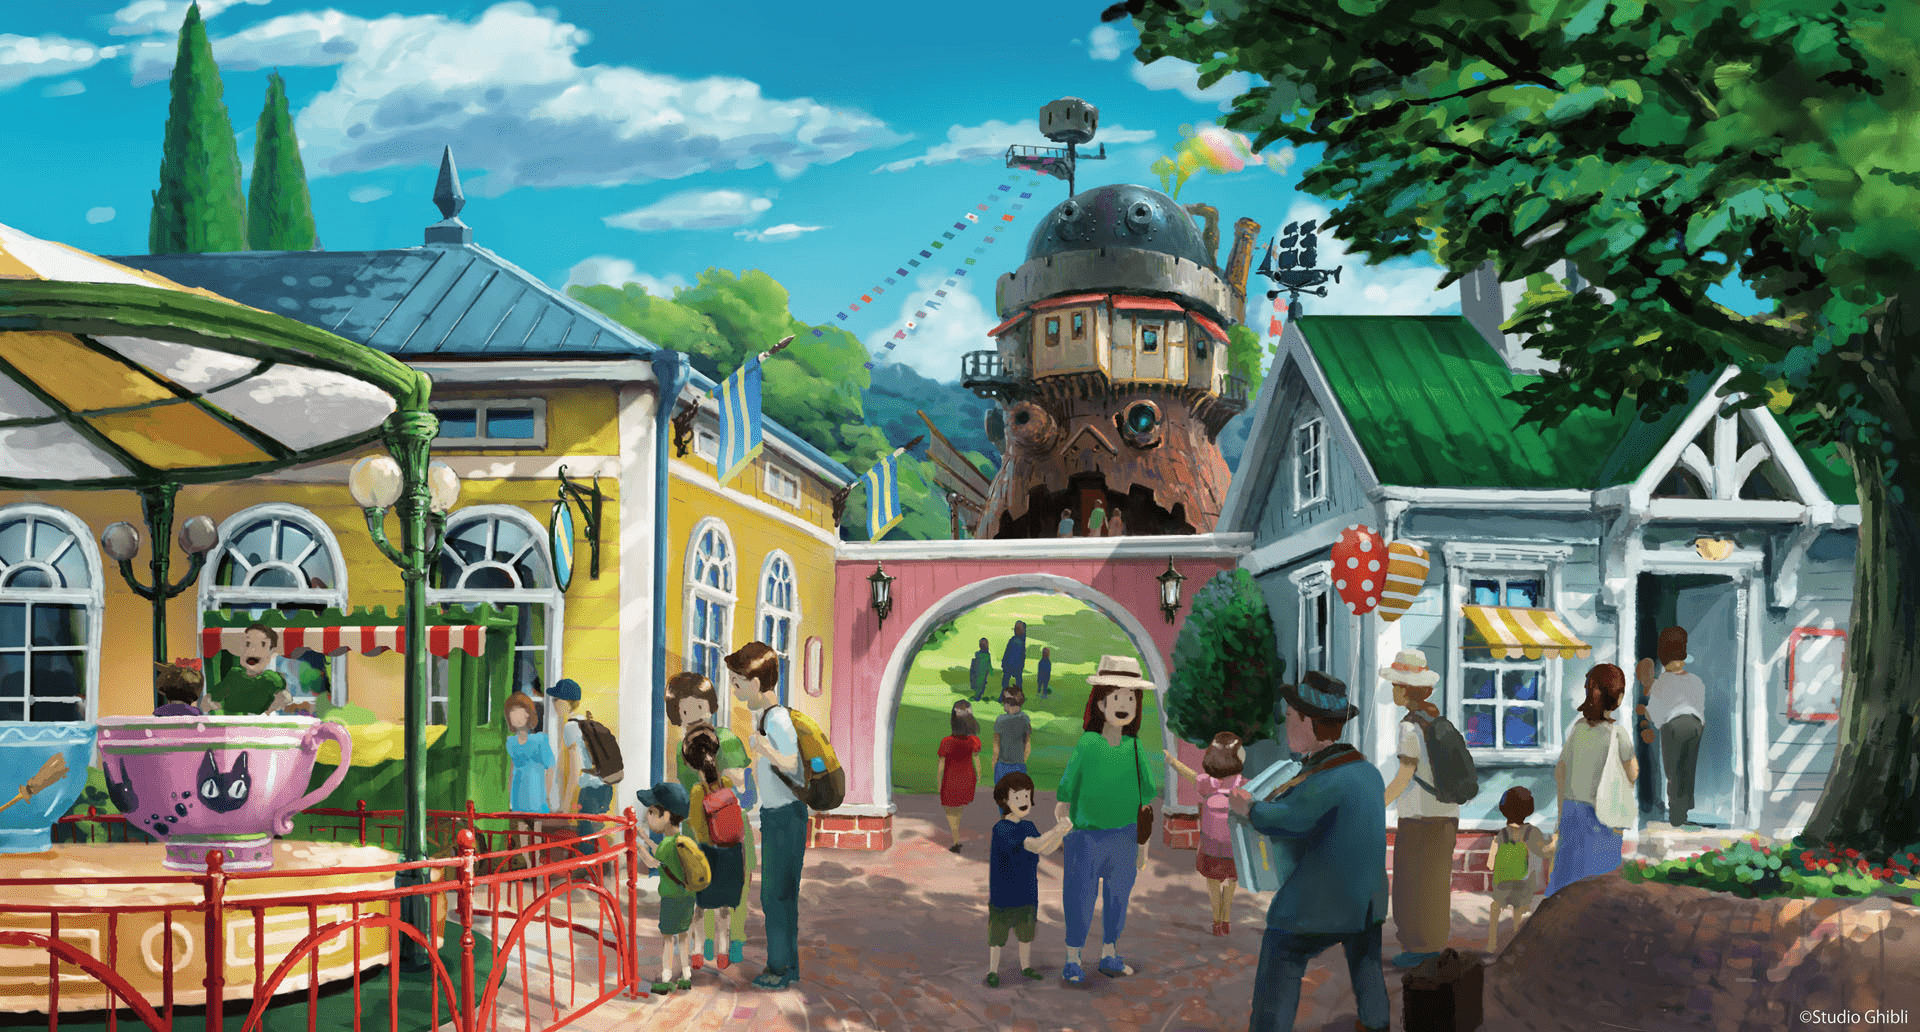 Studio Ghibli Theme Park - Valley of Witches